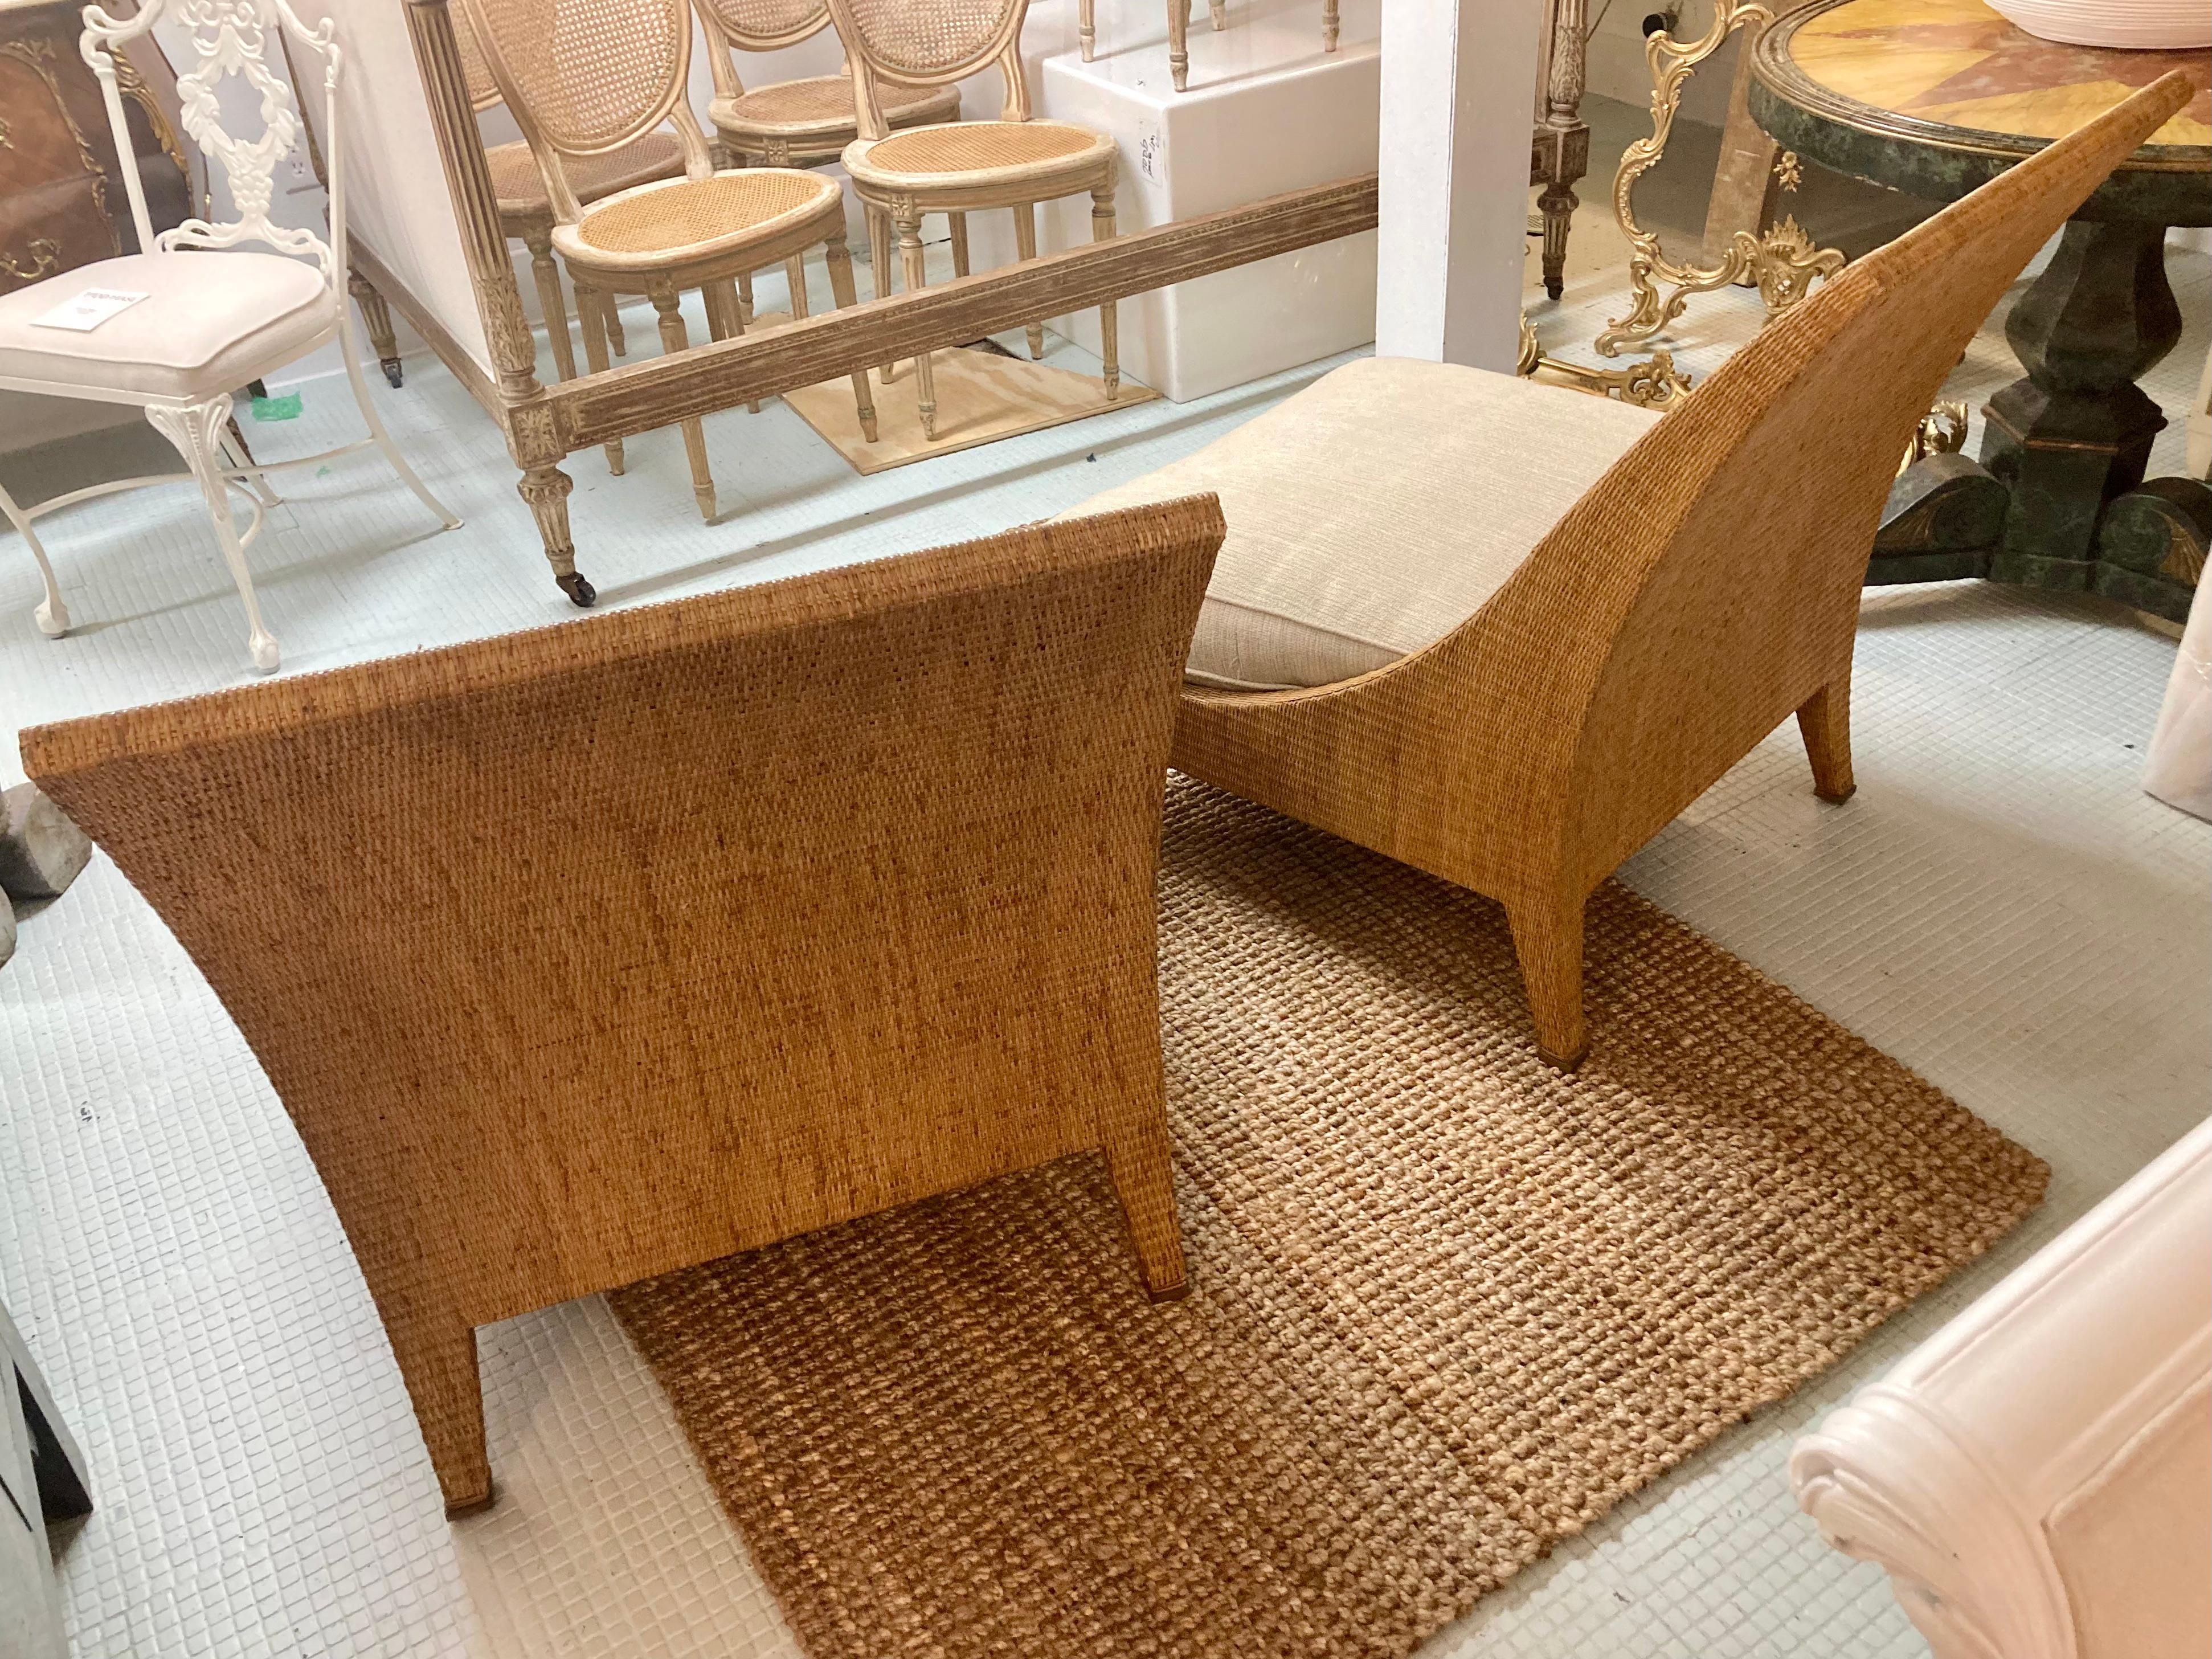 Jacques Garcia for McGuire Woven Raffia Large Club Chairs, a Pair In Good Condition For Sale In Los Angeles, CA